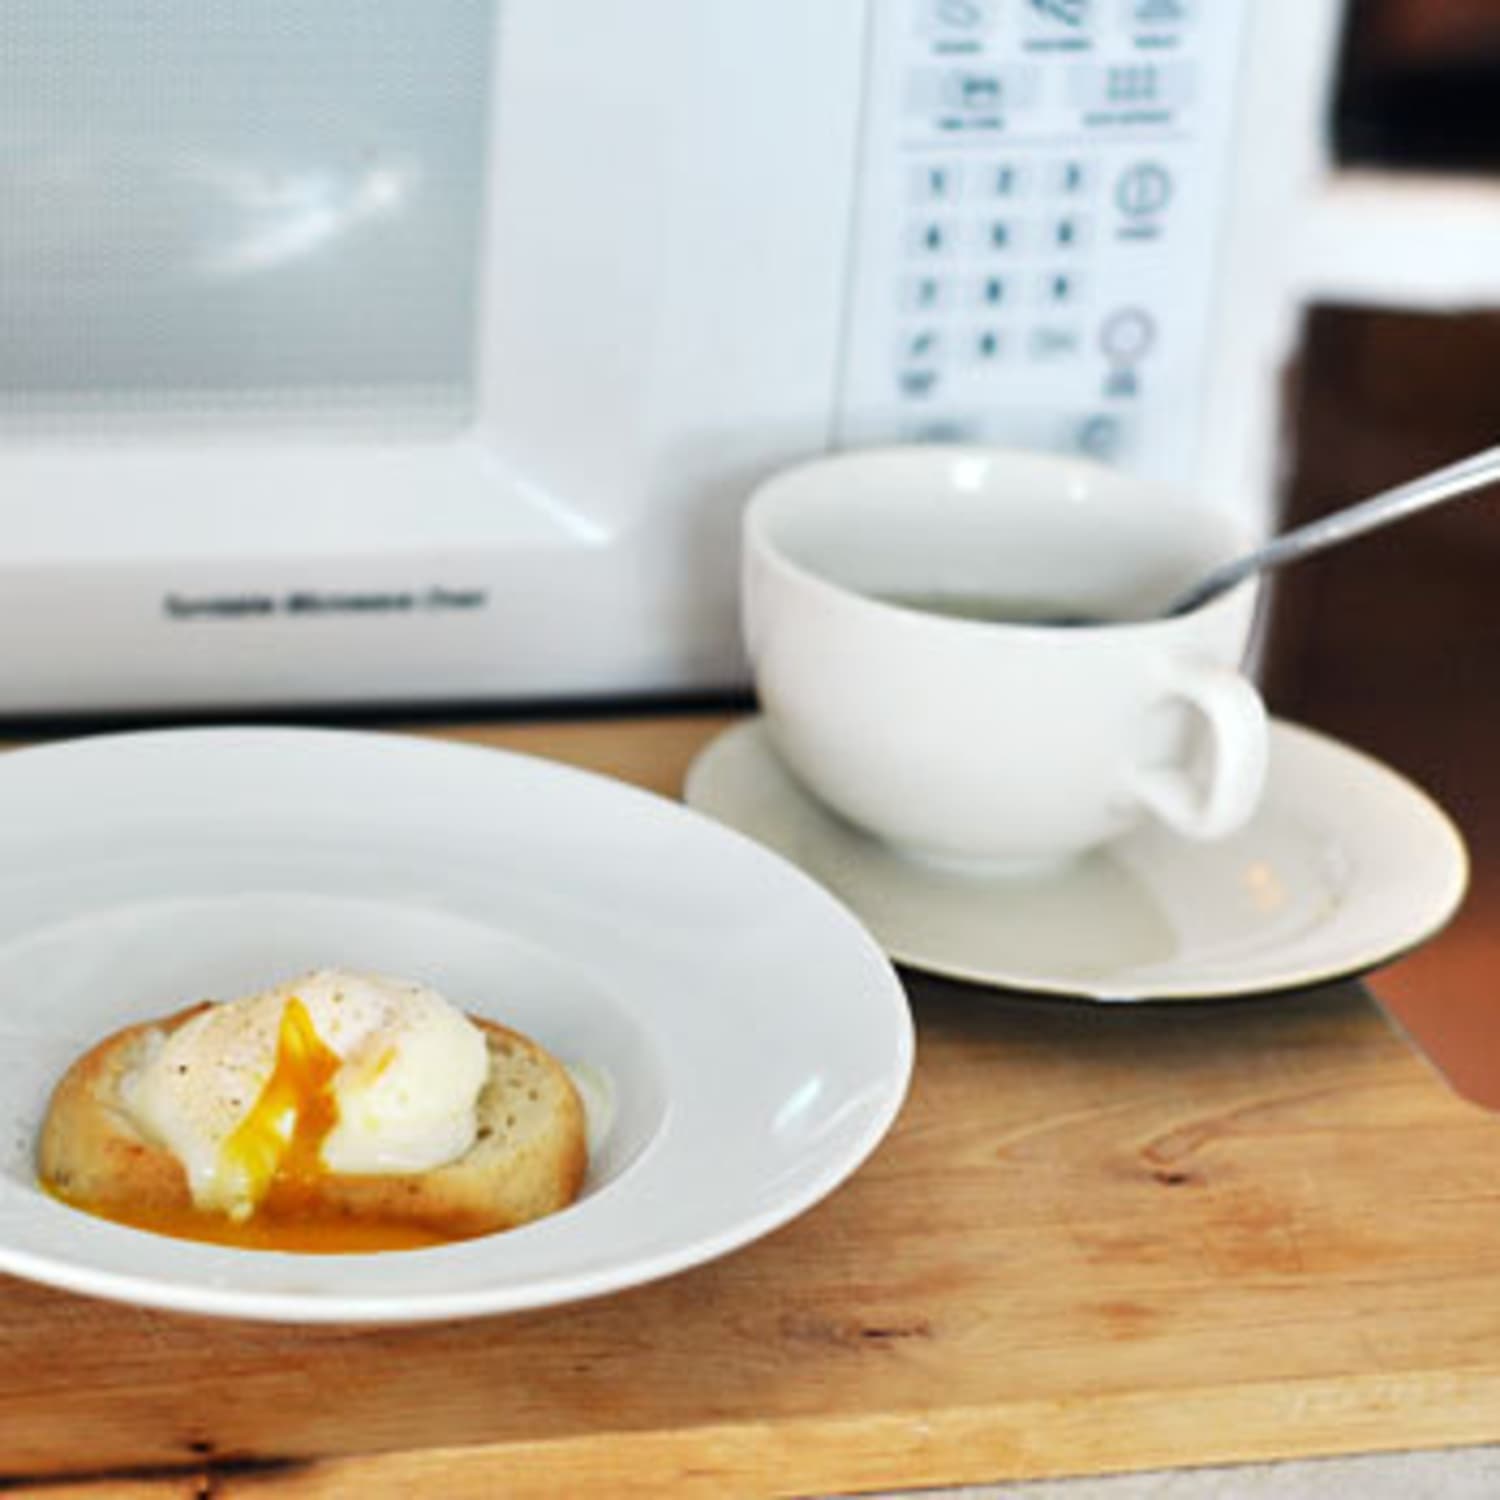 How do i cook a poached egg in the microwave How To Poach An Egg In The Microwave Kitchn